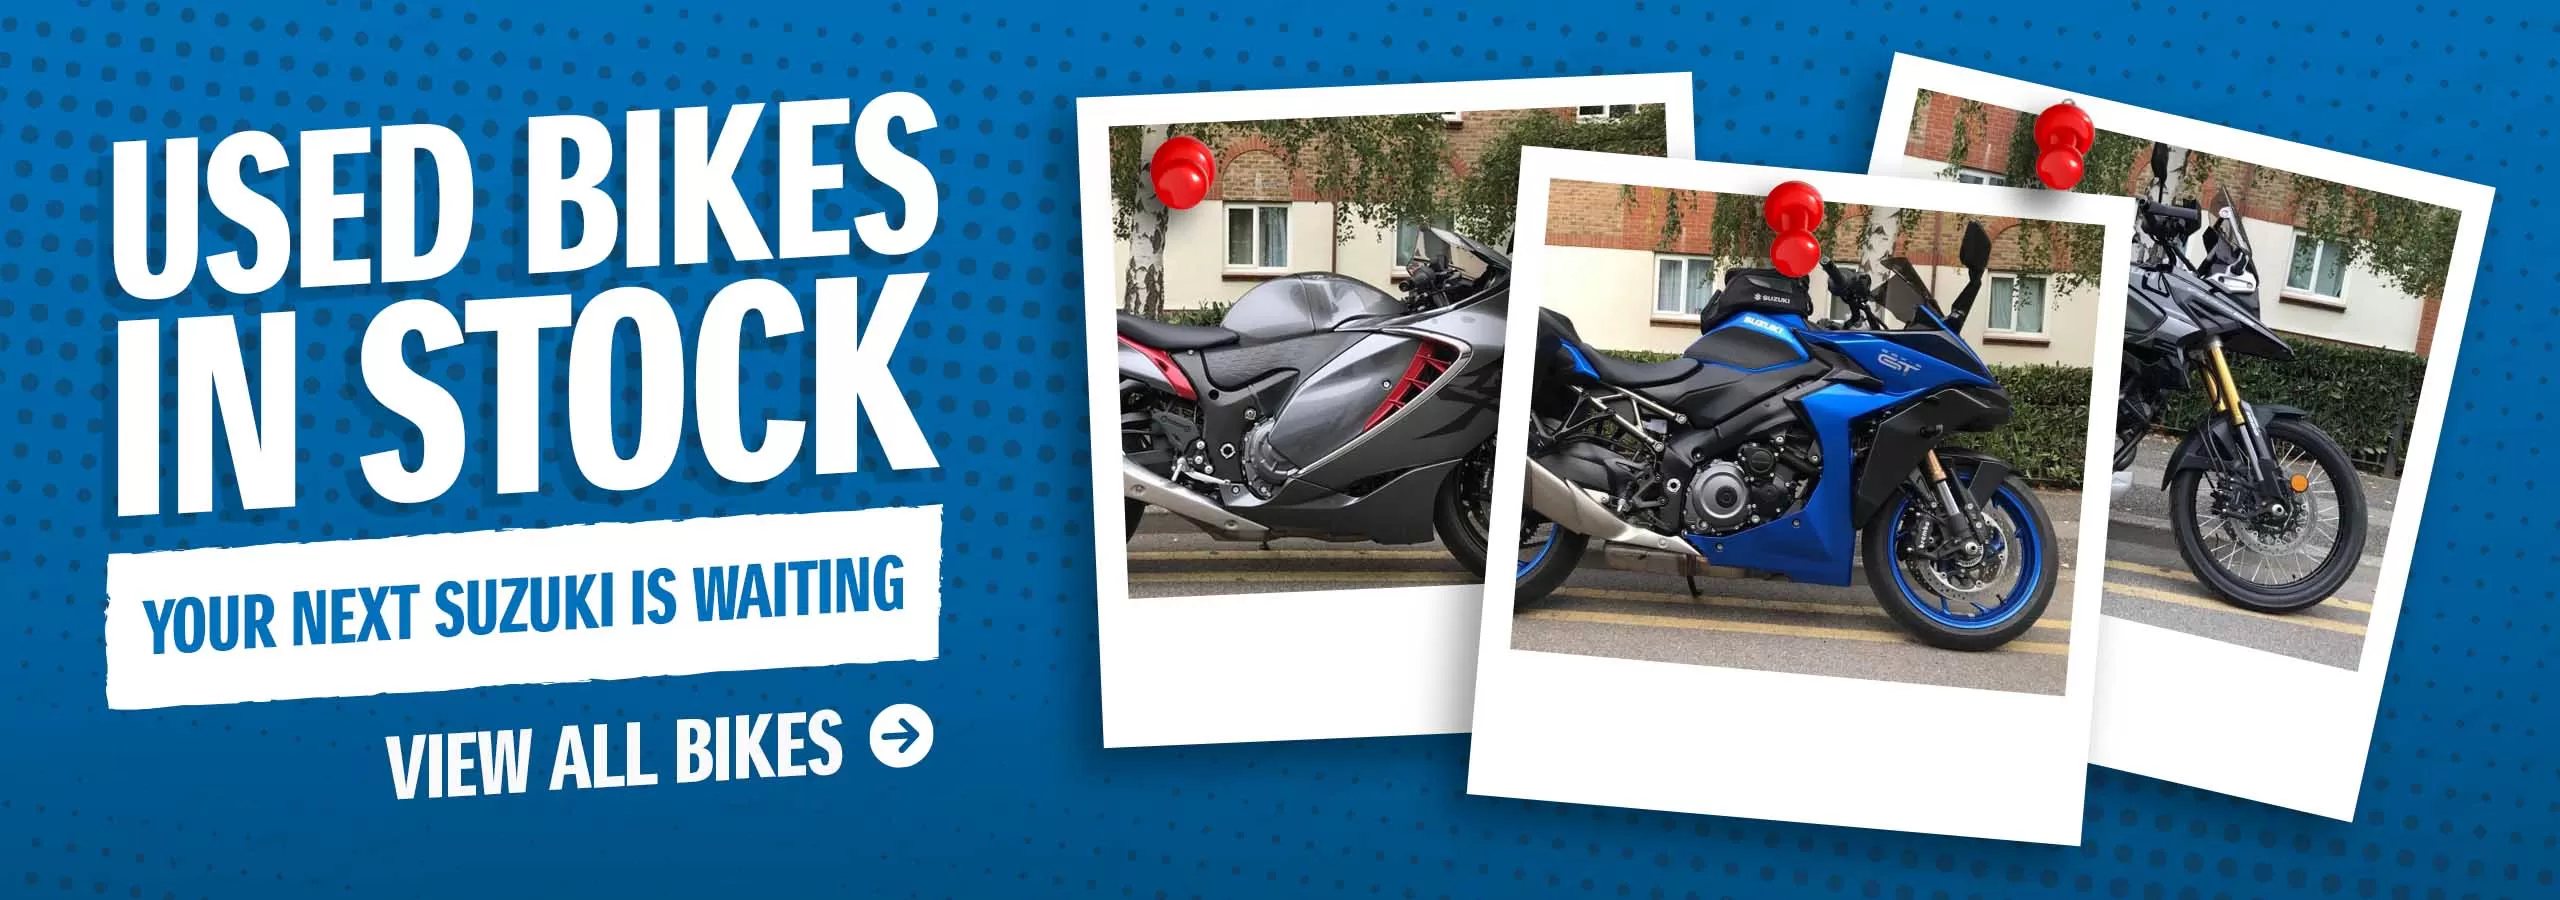 Used Suzuki Motorcycles in stock at Laguna Motorcycles in Maidstone